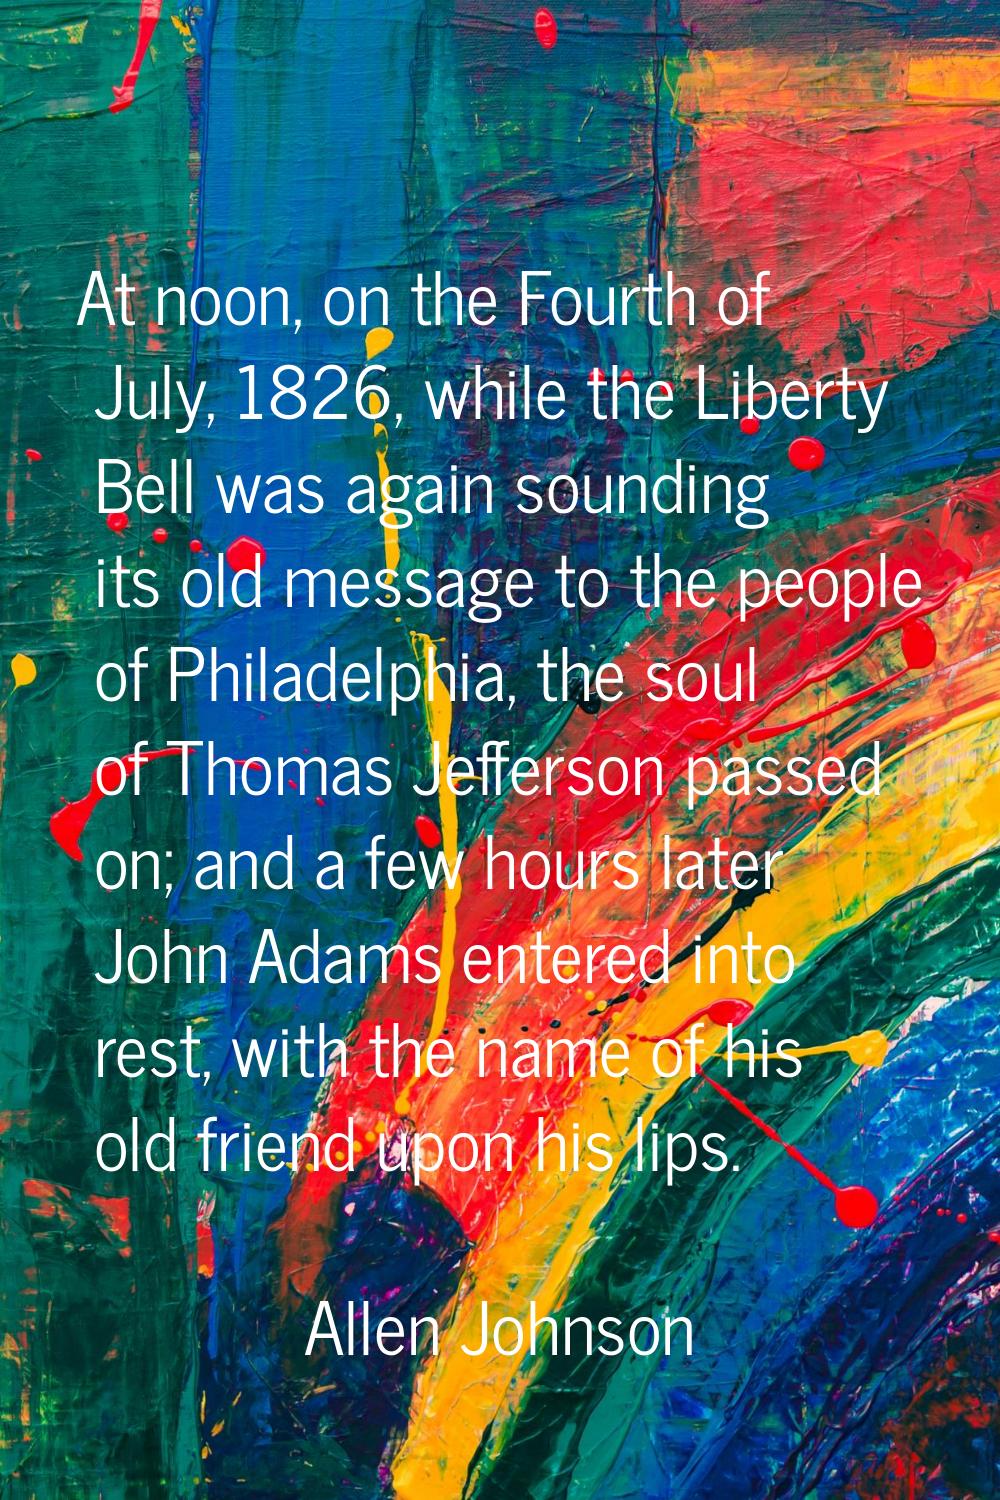 At noon, on the Fourth of July, 1826, while the Liberty Bell was again sounding its old message to 